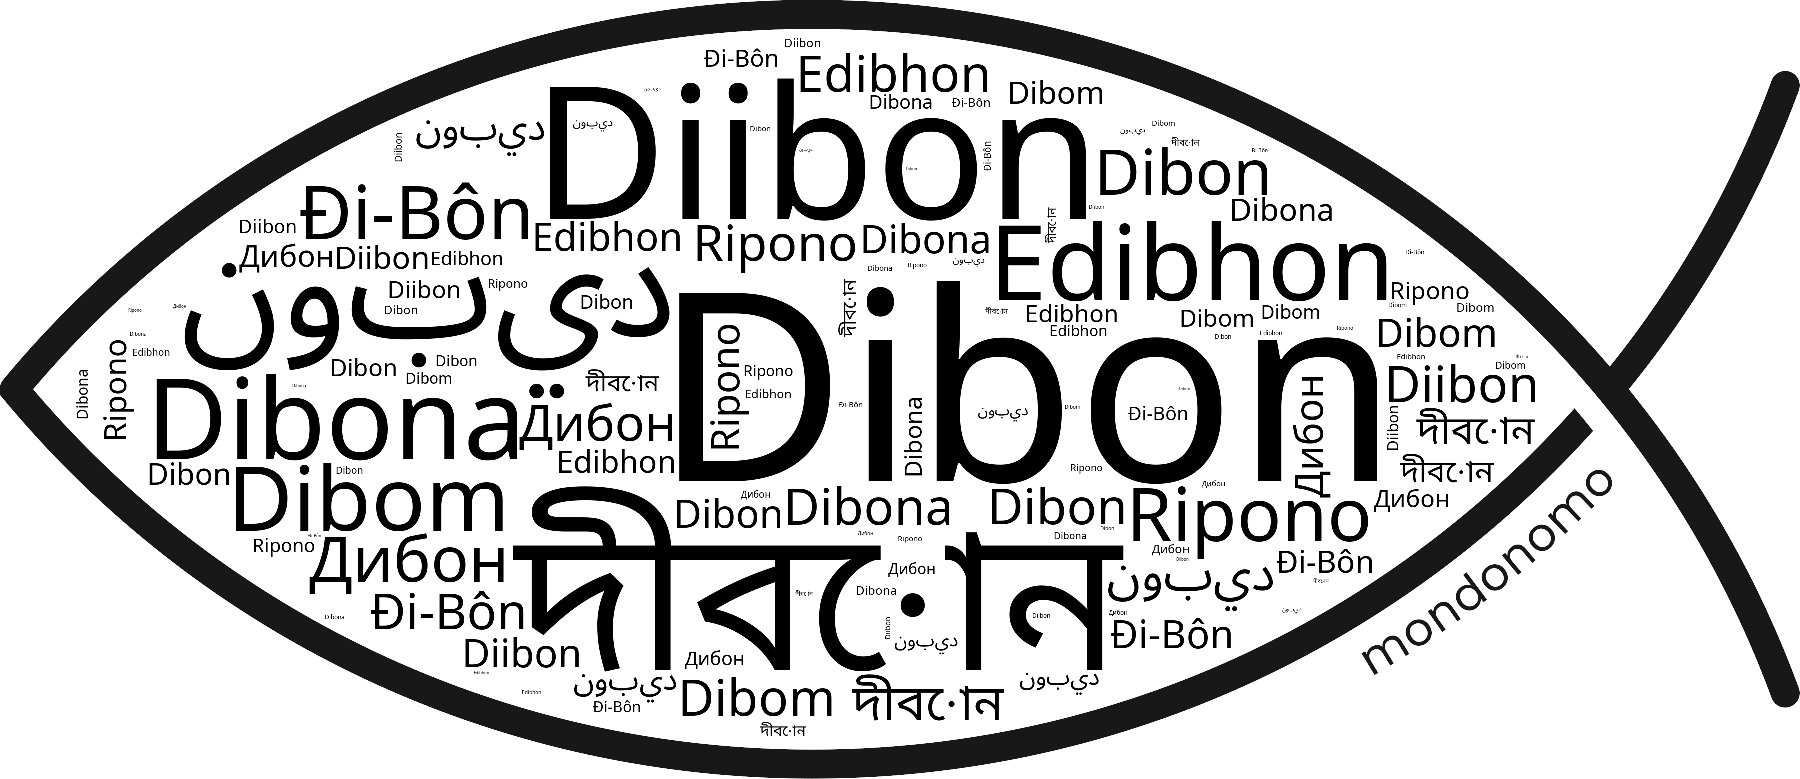 Name Dibon in the world's Bibles